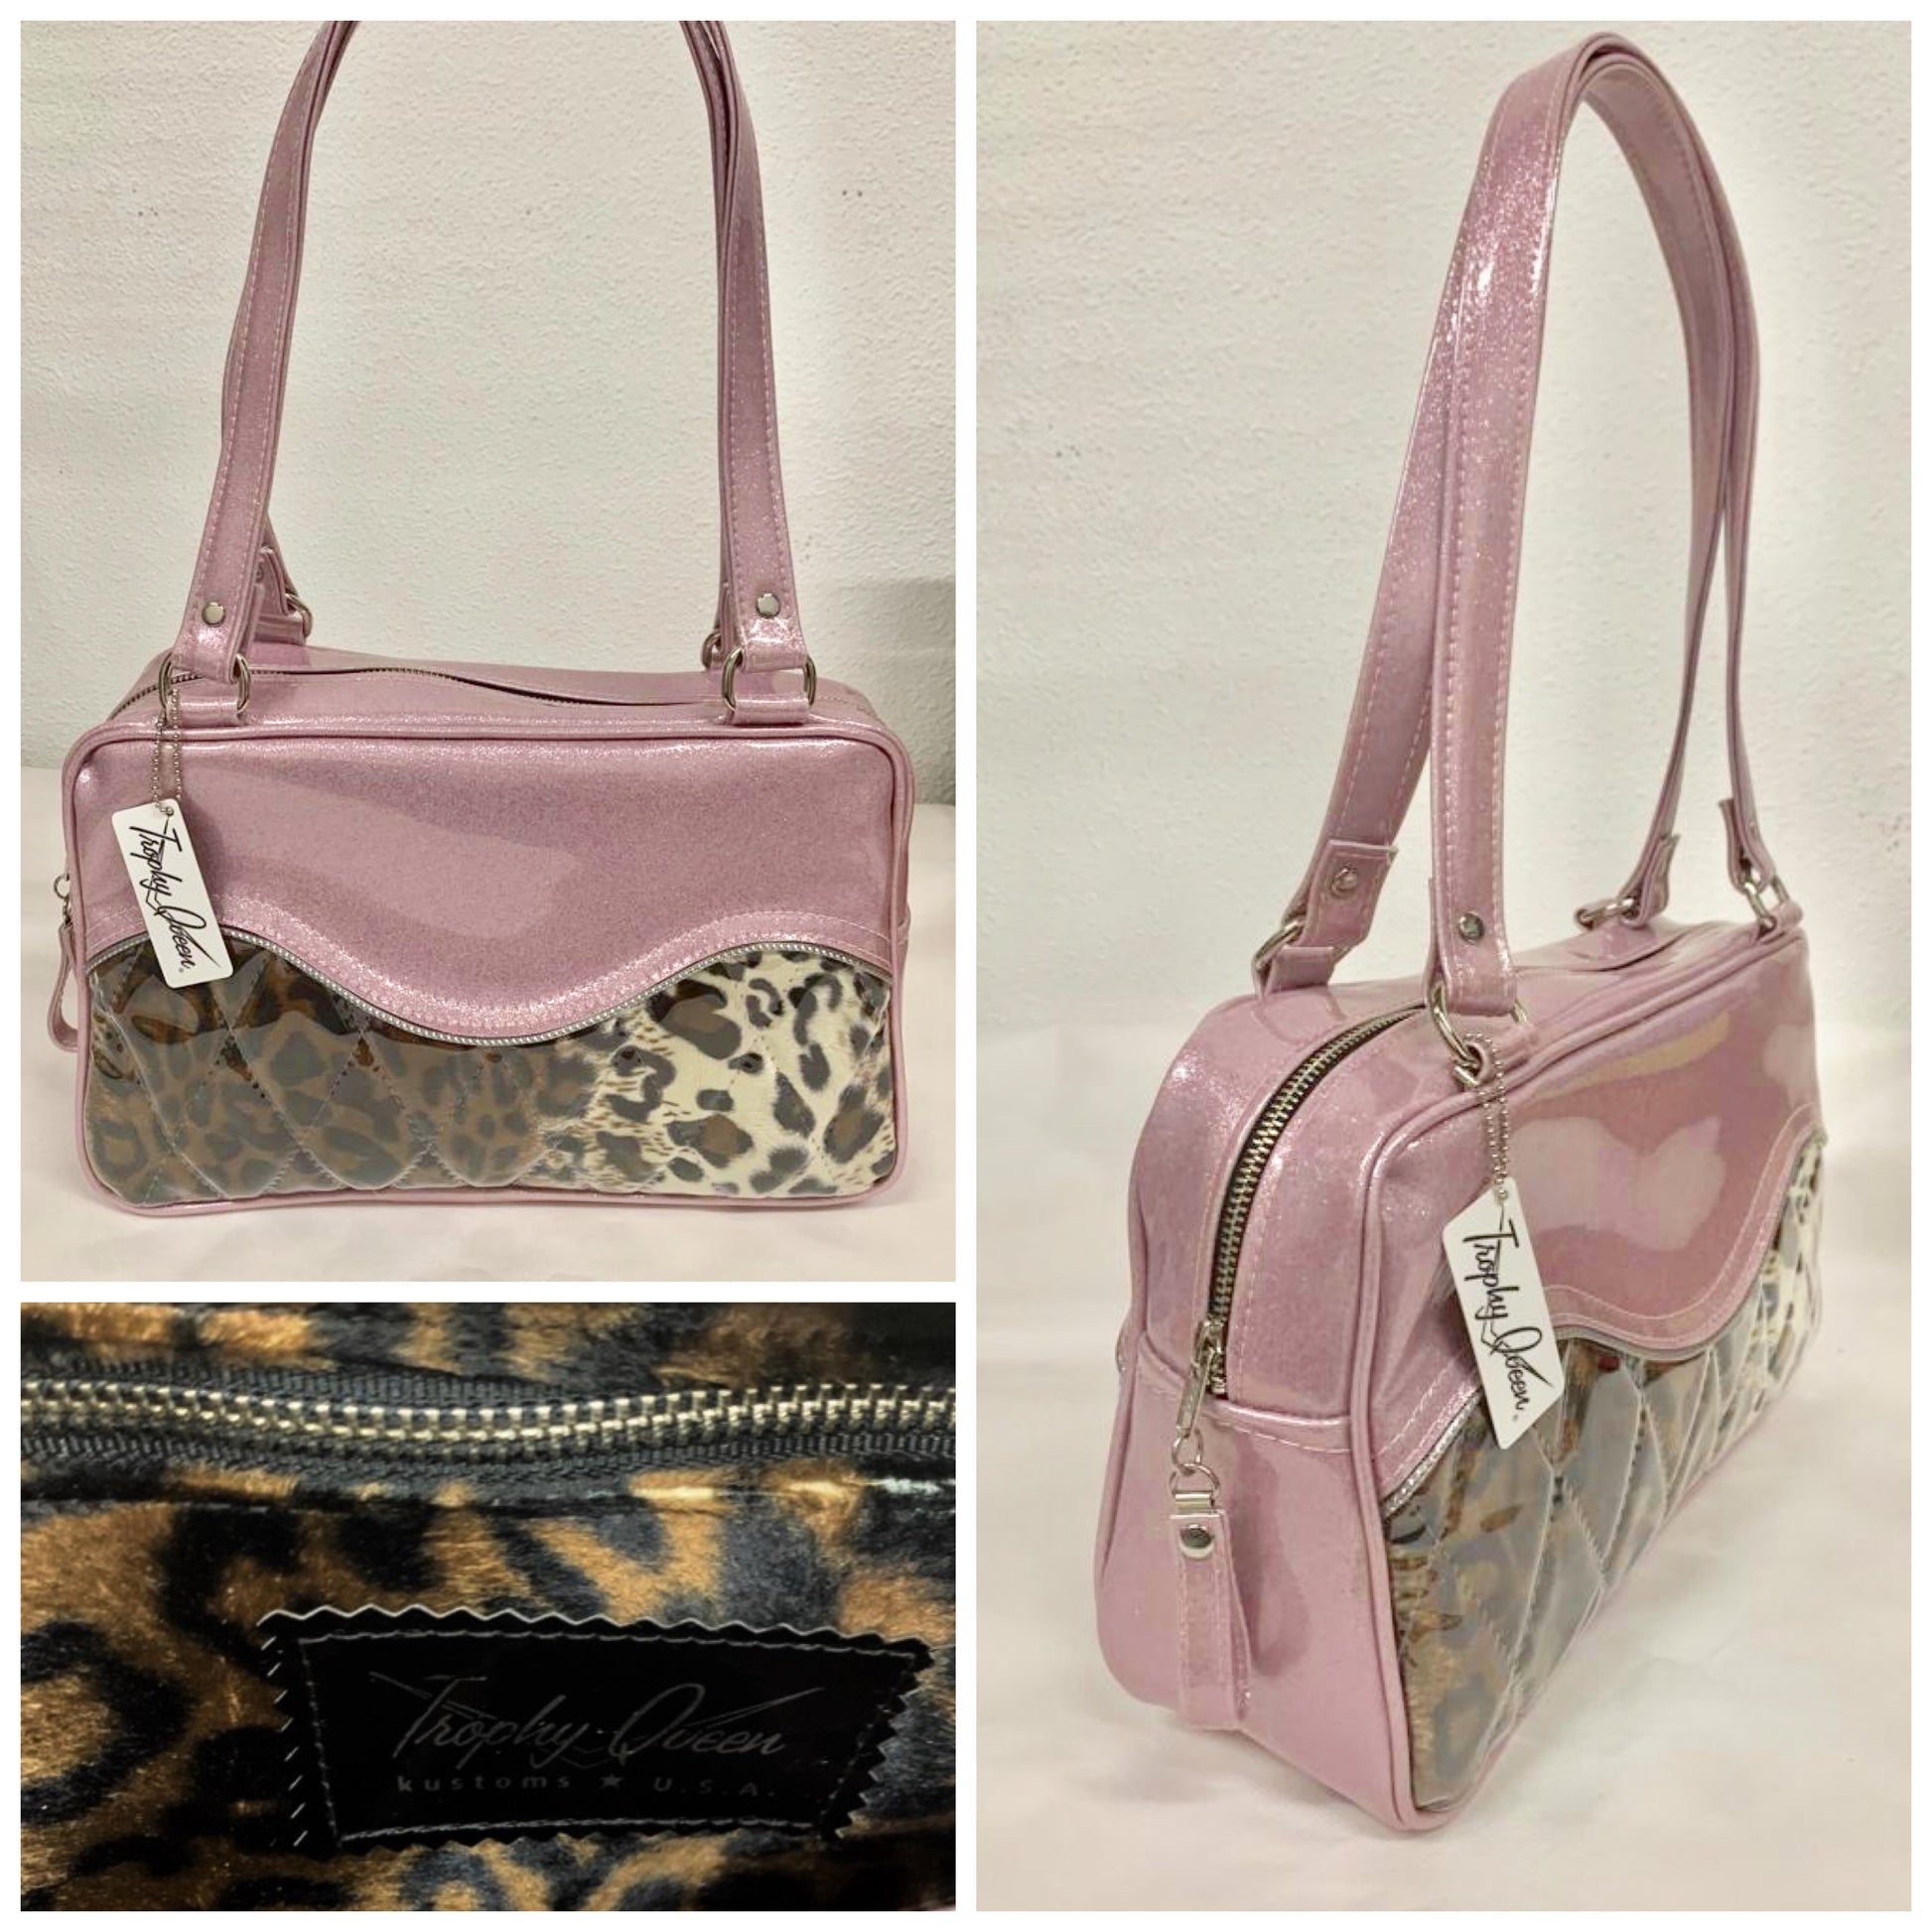 The Diamond Pleat Tuck and Roll Tote in Blush Pink Glitter Vinyl and Leopard with clear overlay lined with matching plush leopard is handcrafted in California with nickel hardware and 25” straps plus it comes with replacement straps. Inside open divided pocket and inside zipper pocket with serial number hidden inside. Nickel feet, vinyl zipper pull, and signature Trophy Queen Label included. The perfect size bag for any trip!